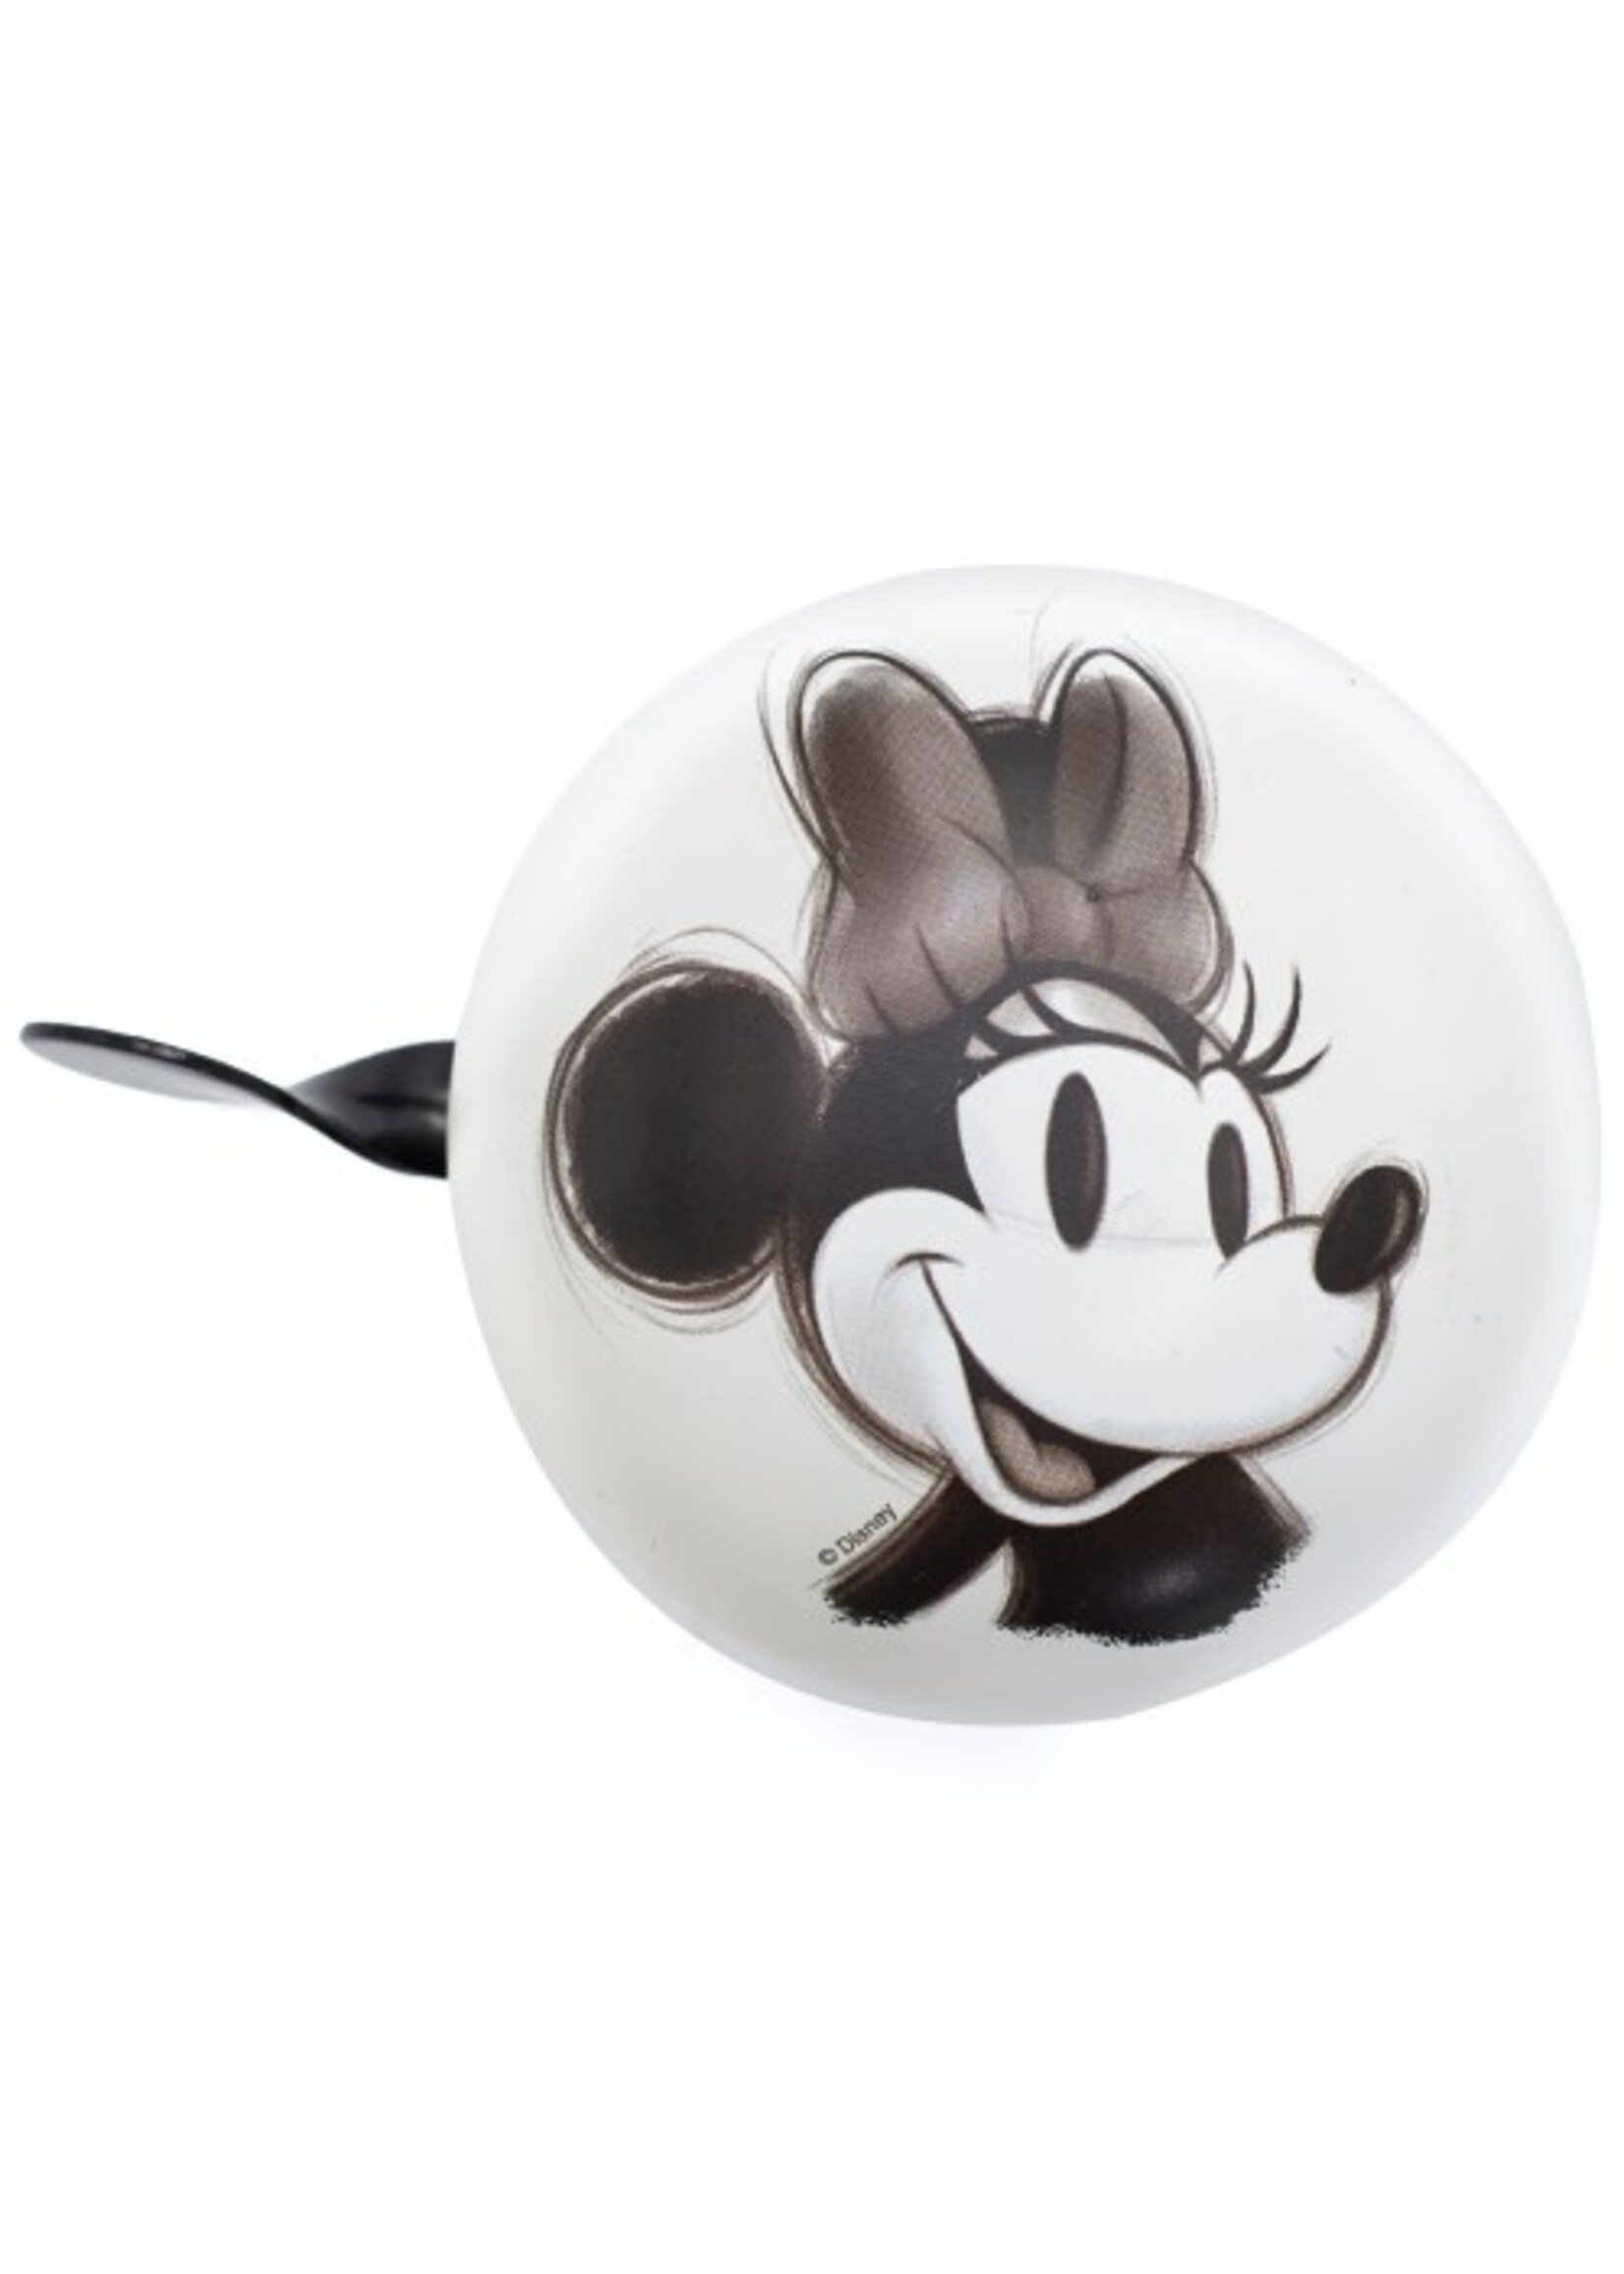 Disney Junior bicycle bell Minnie Mouse from Disney white